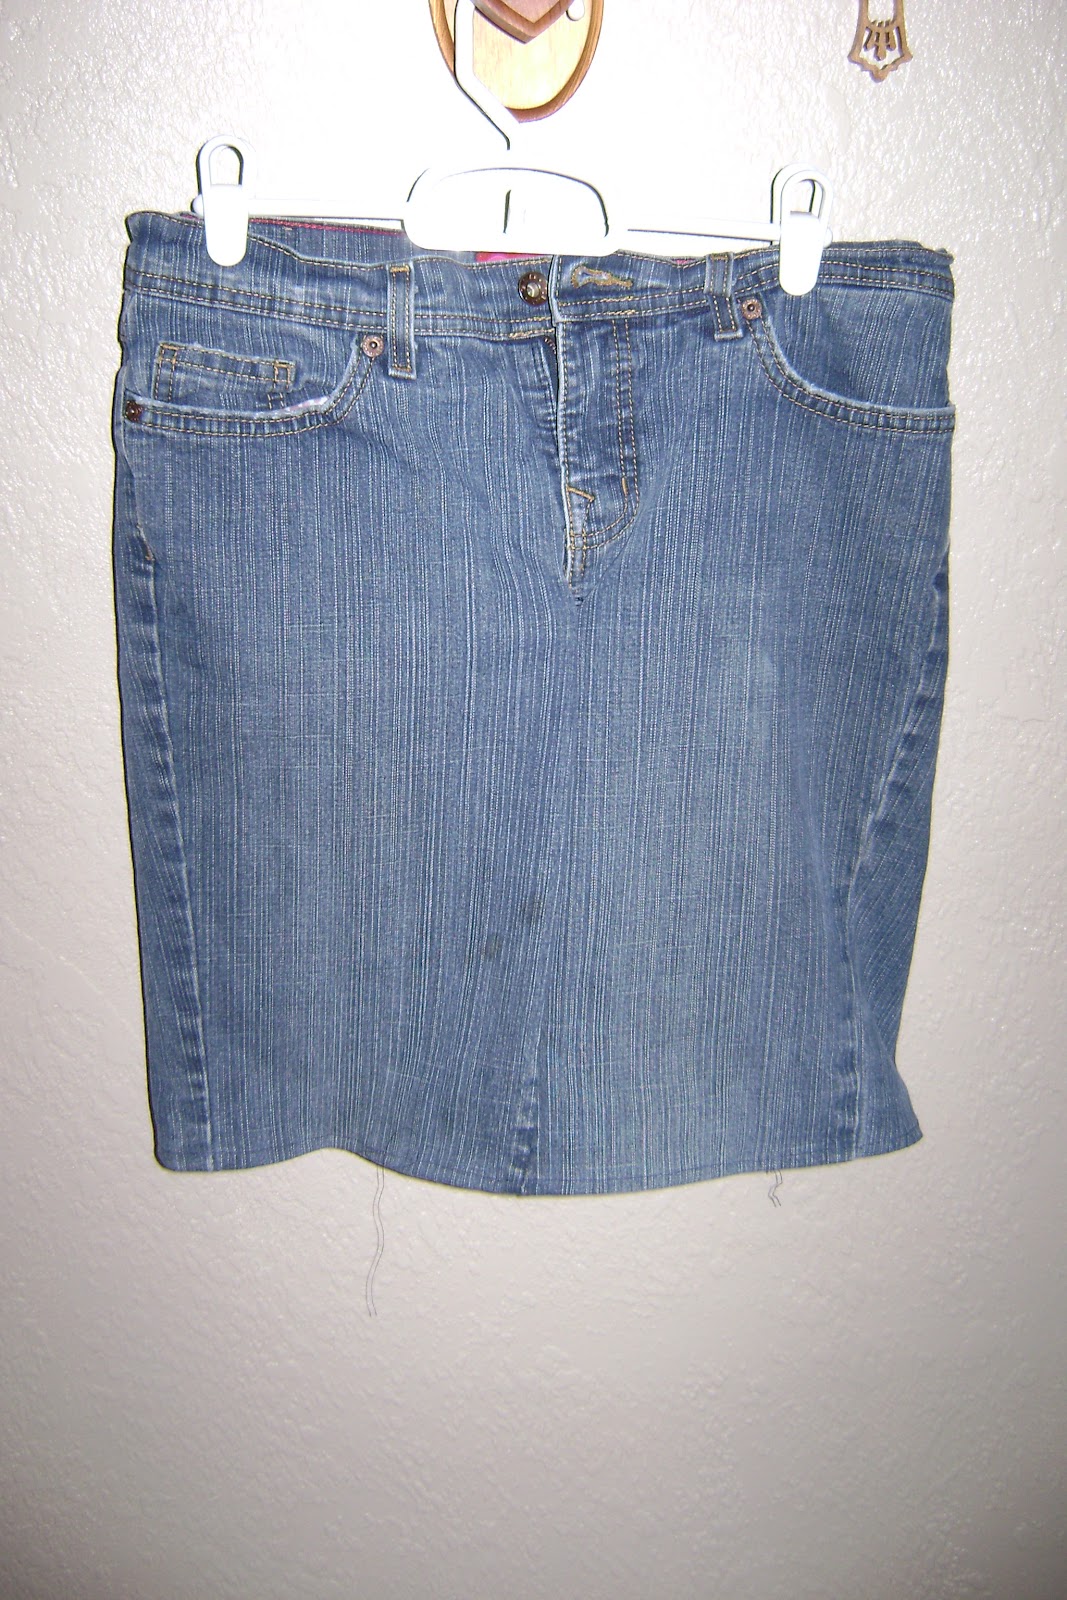 Rejoicing In The Present: DIY Jeans-Skirt